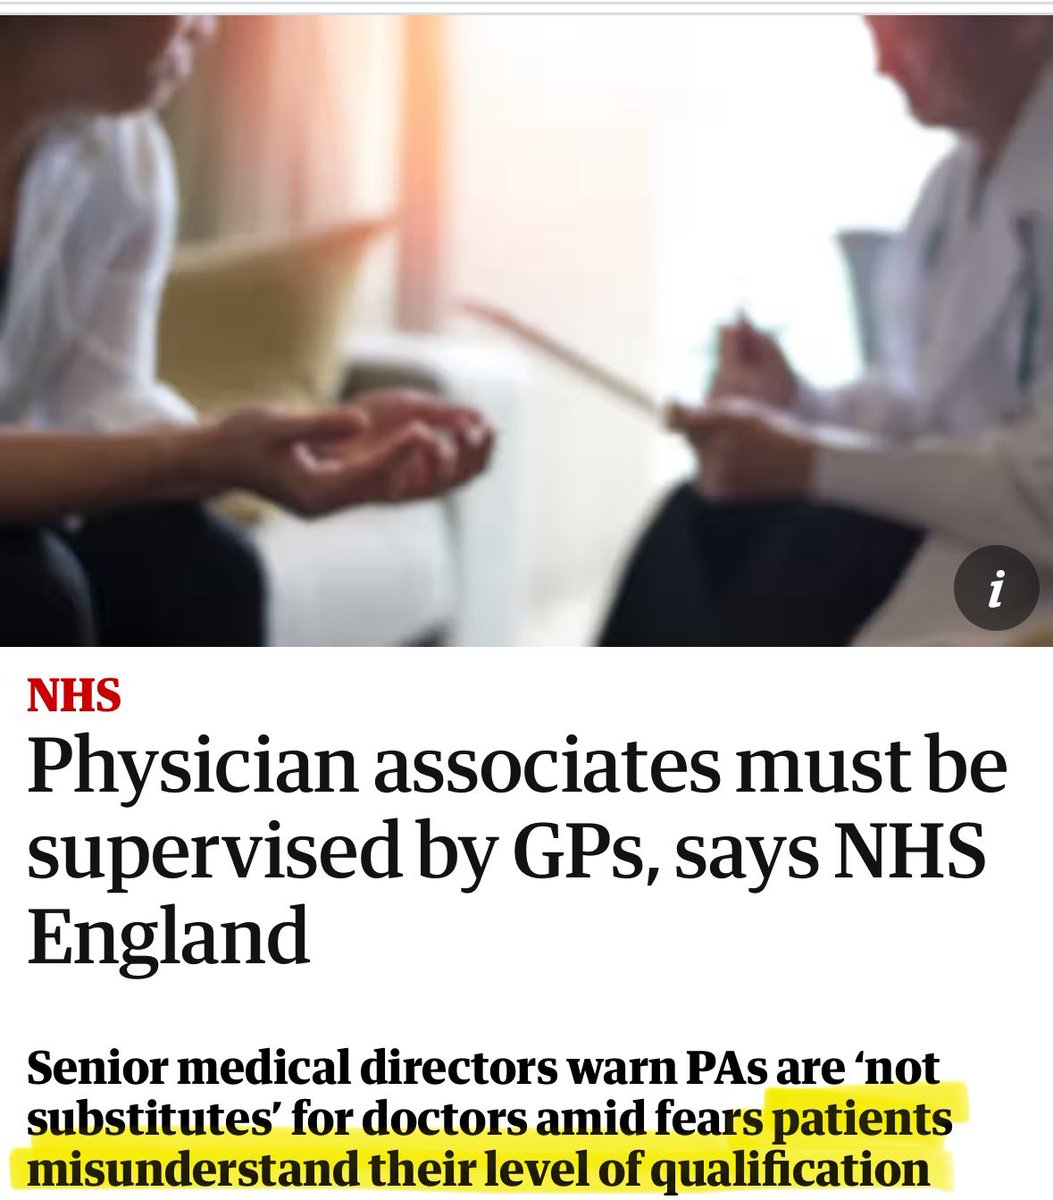 So NHS E have issued a statement saying each patient contact of PAs MUST be debriefed with their supervising GP. A medical director is worried that patients misunderstand PA level of qualification….well from the last 15 months it’s crystal clear so do PAs 🙃